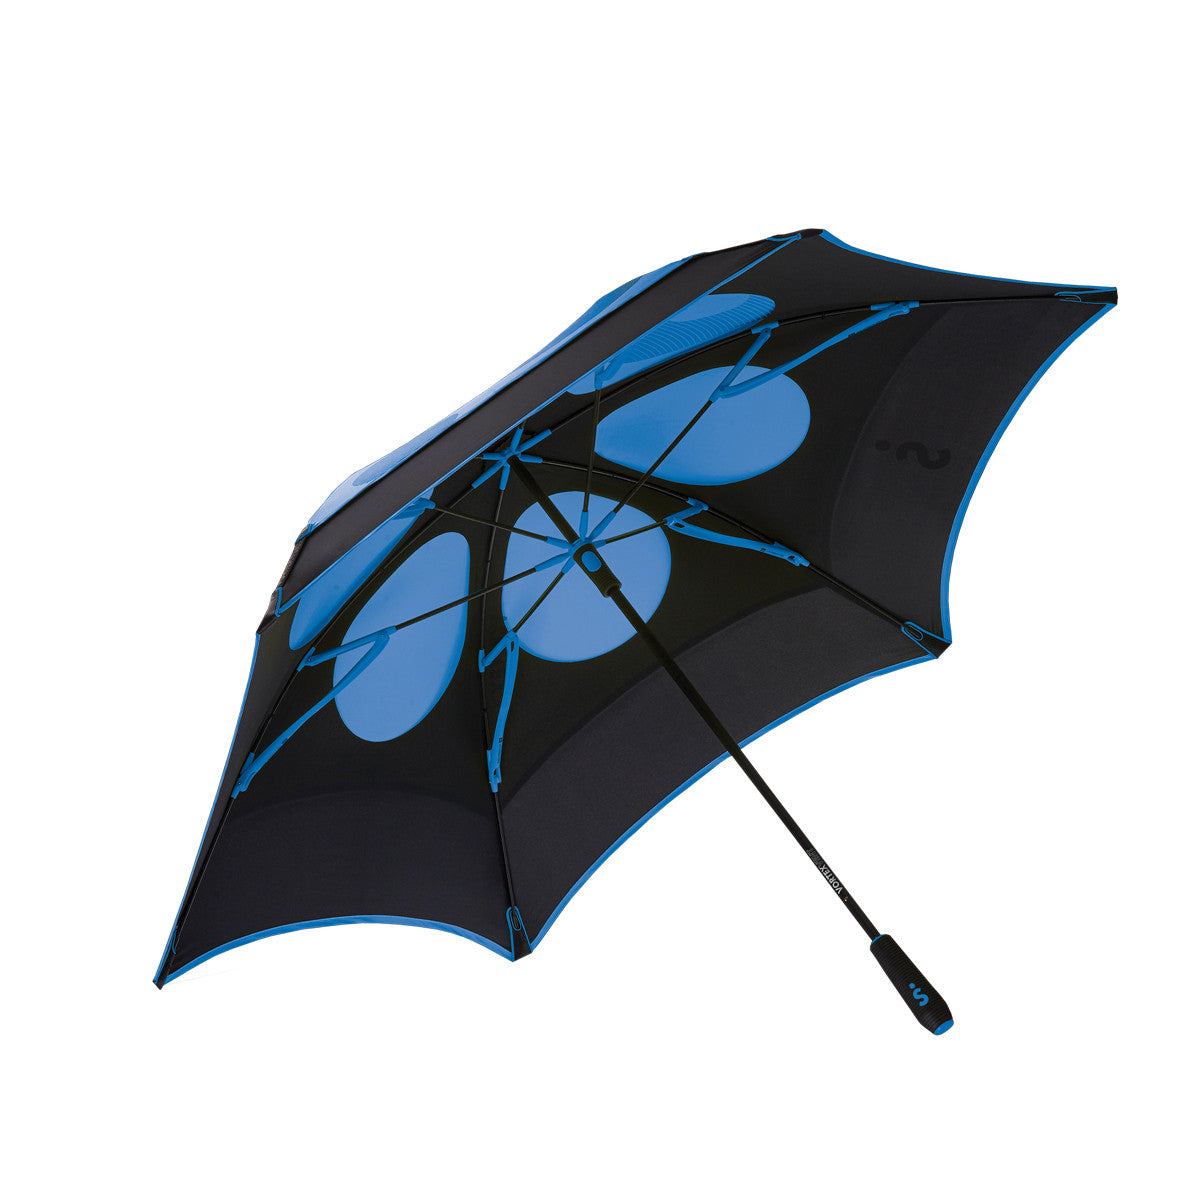 bright blue and black vented double canopy wind-resistant three person Vortex Vent golf umbrella with black and blue fiberglass frame and rubber grip, open, as viewed from the underside